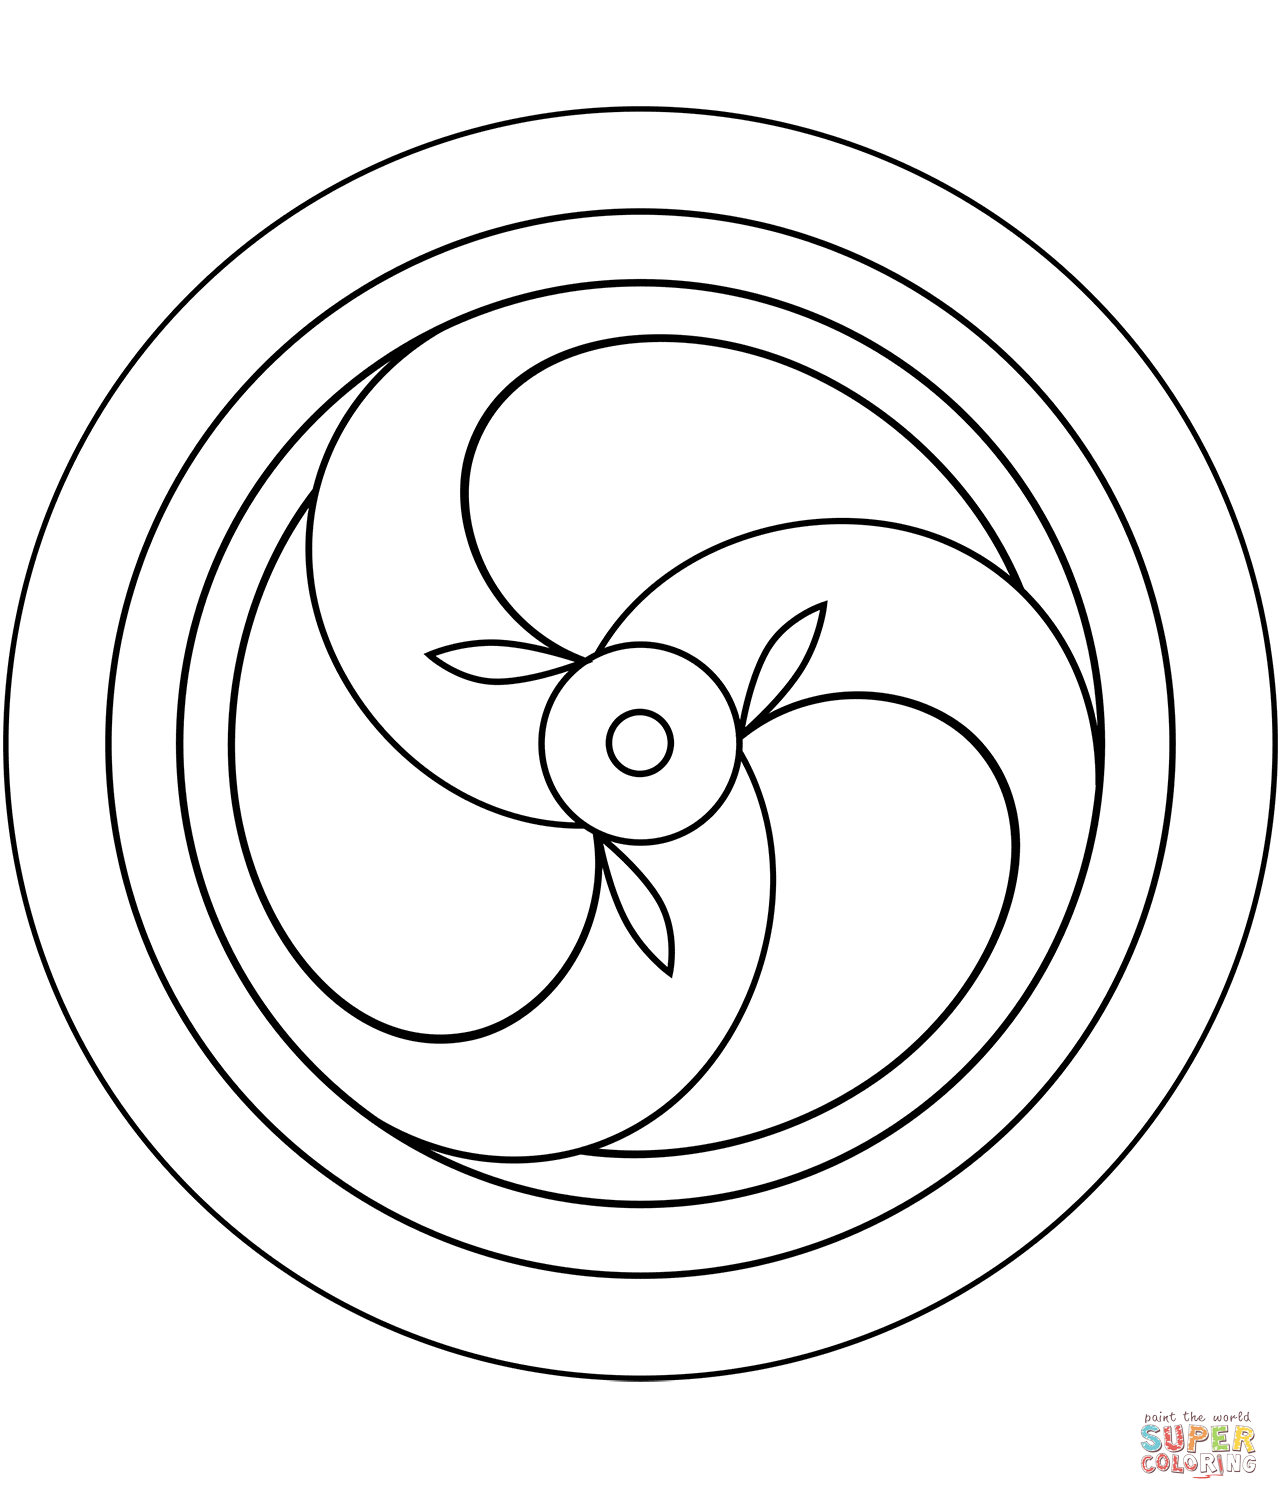 Trinity Spiral Mandala coloring page | Free Printable Coloring Pages